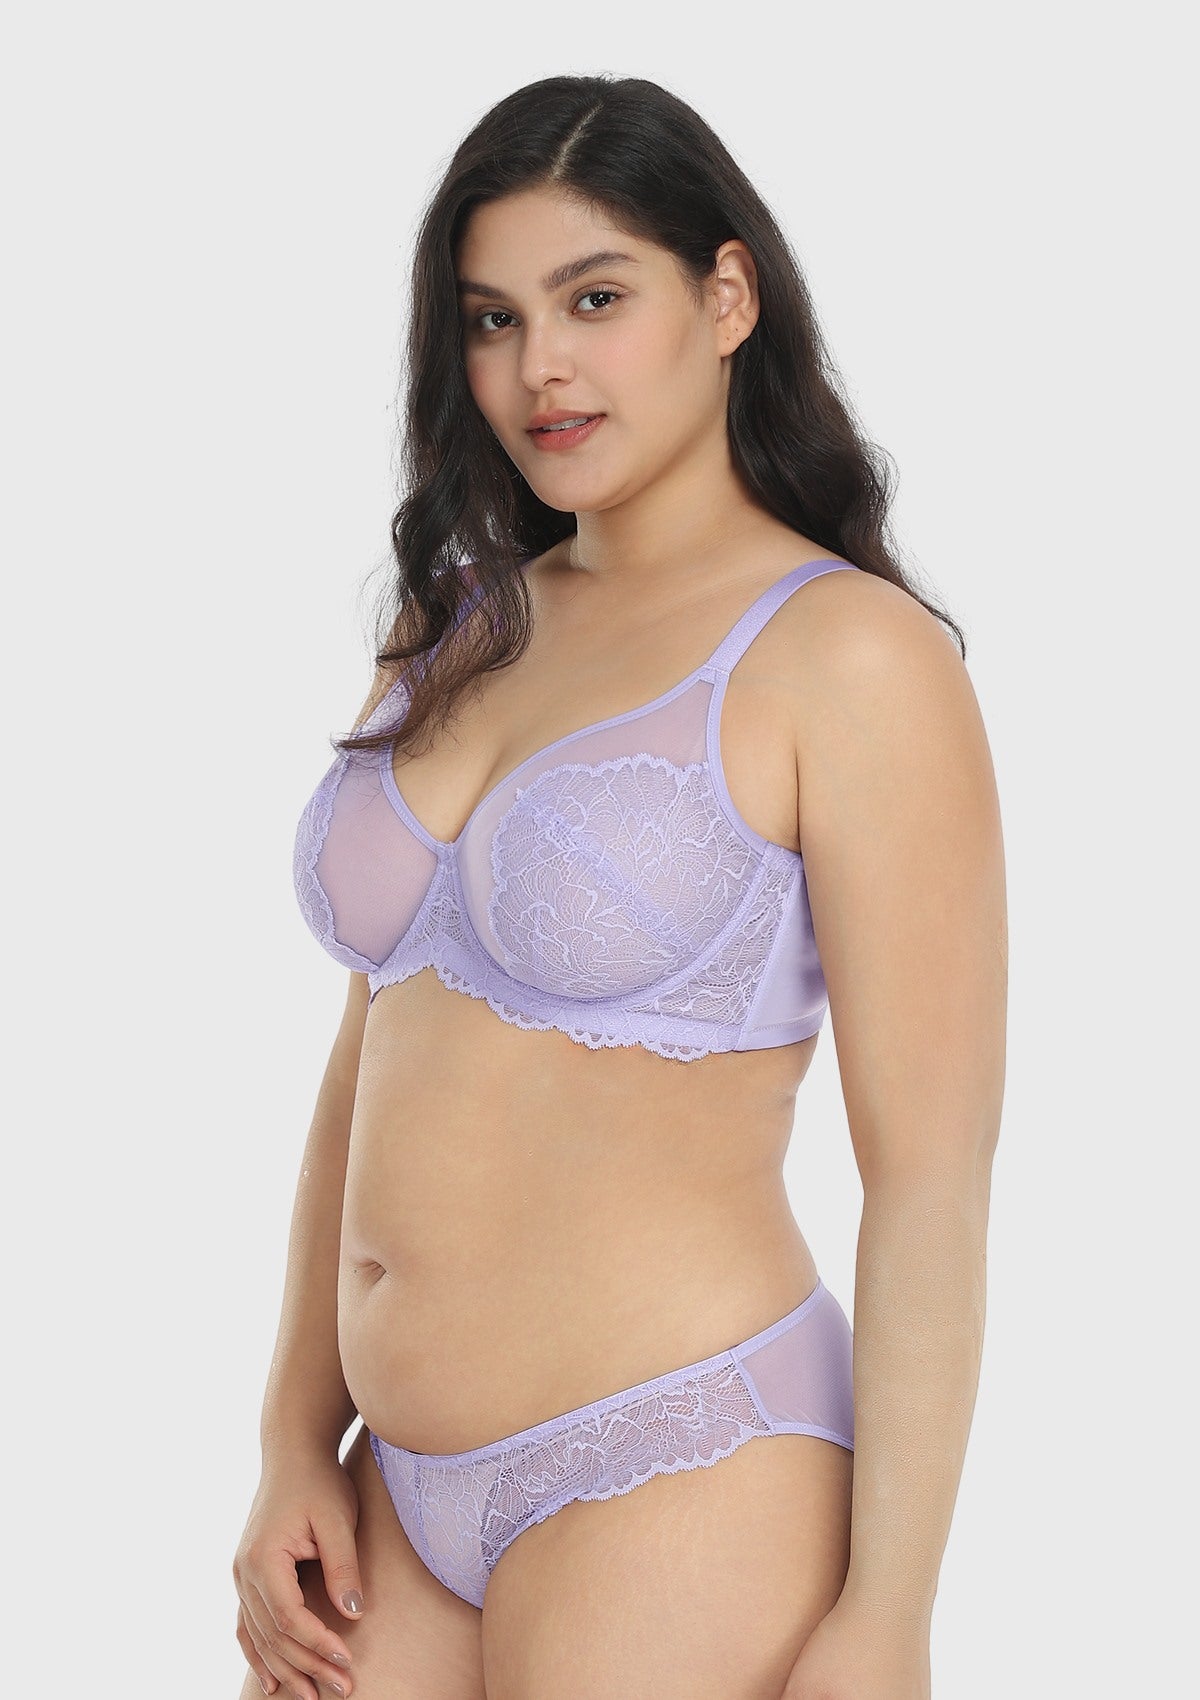 HSIA Blossom Transparent Lace Bra: Plus Size Wired Back Smoothing Bra - Light Purple / 44 / G